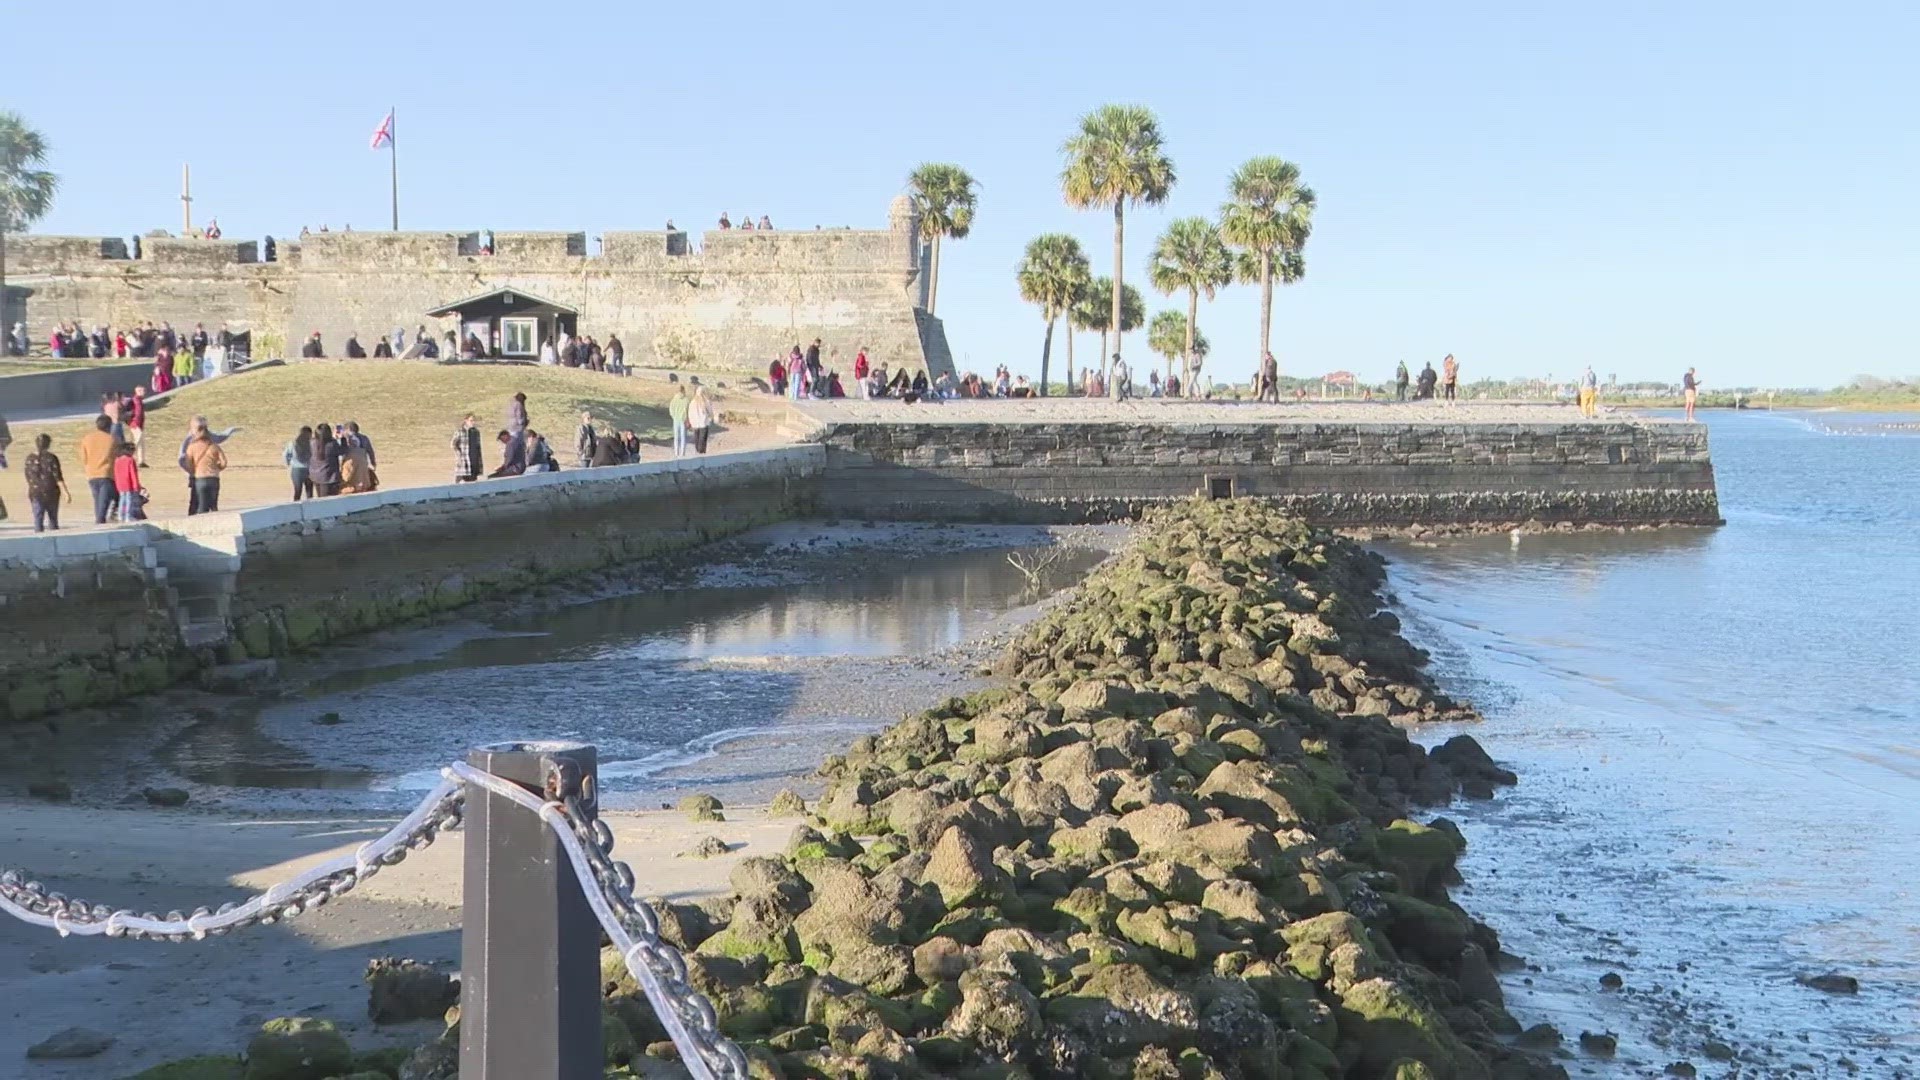 FDOT is looking at a plan to re-do the seawall, dropping this promenade down so visitors wouldn’t be able to walk on top of it.